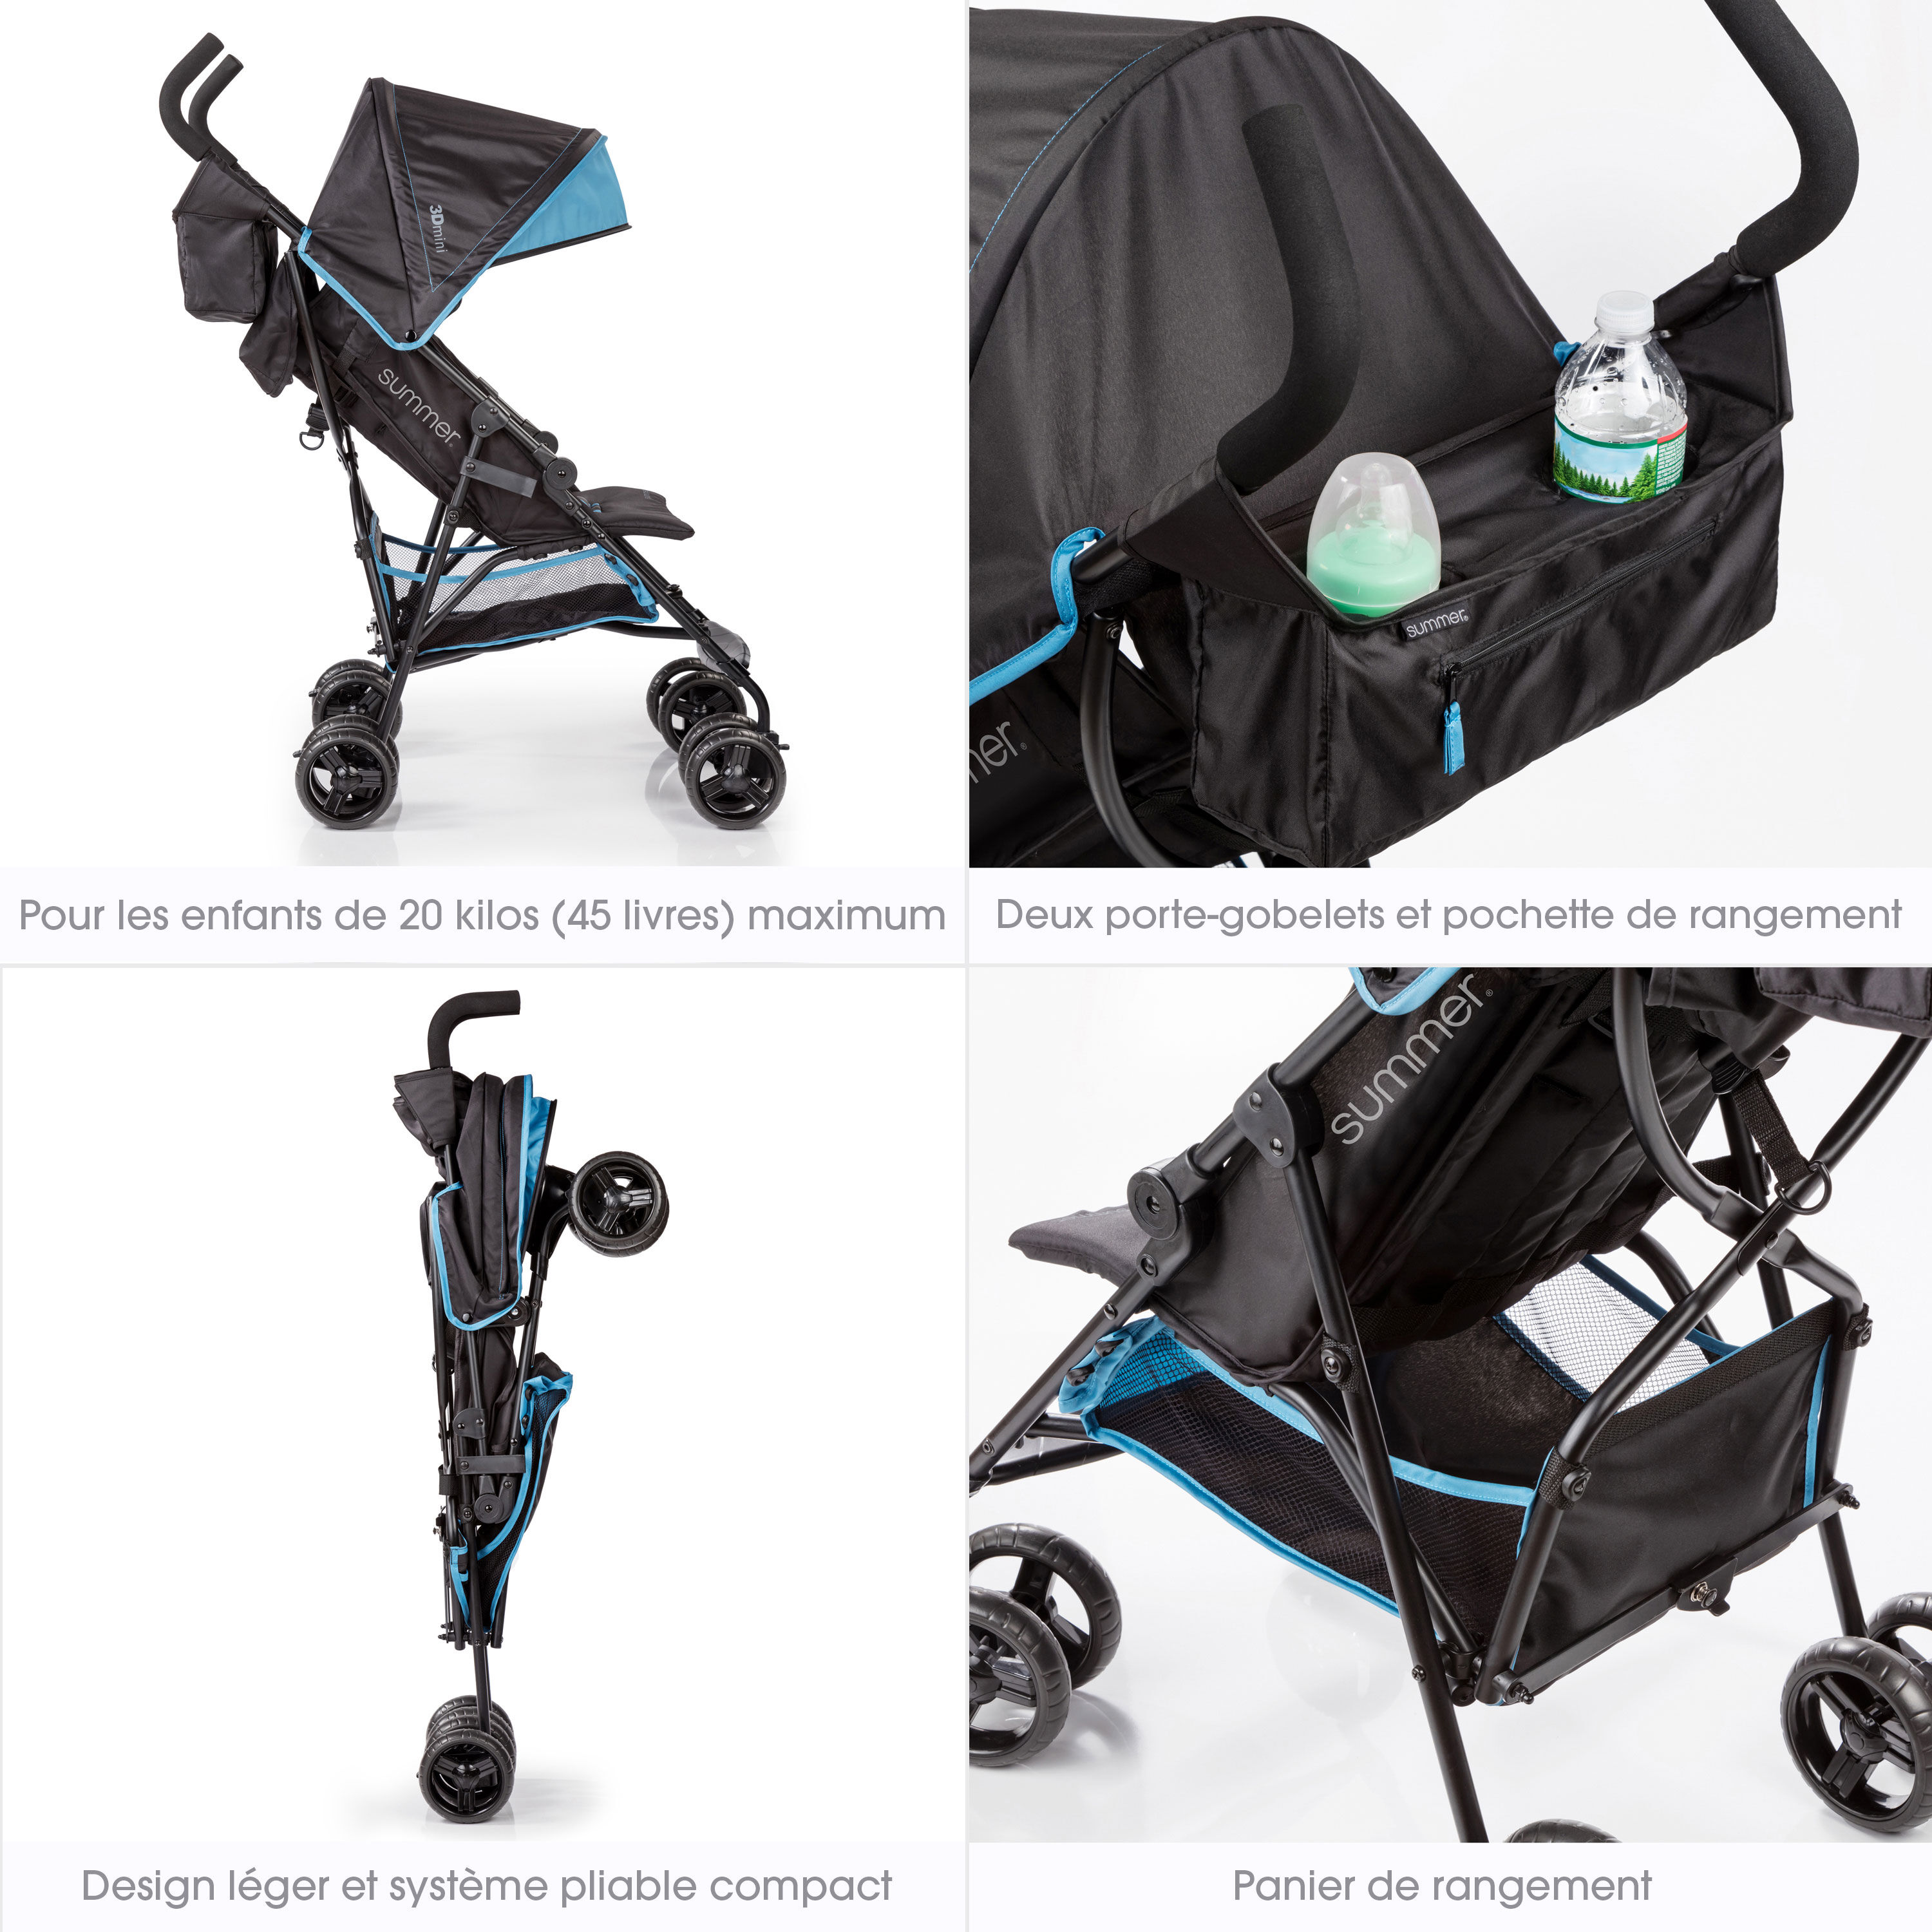 summer infant one convenience stroller